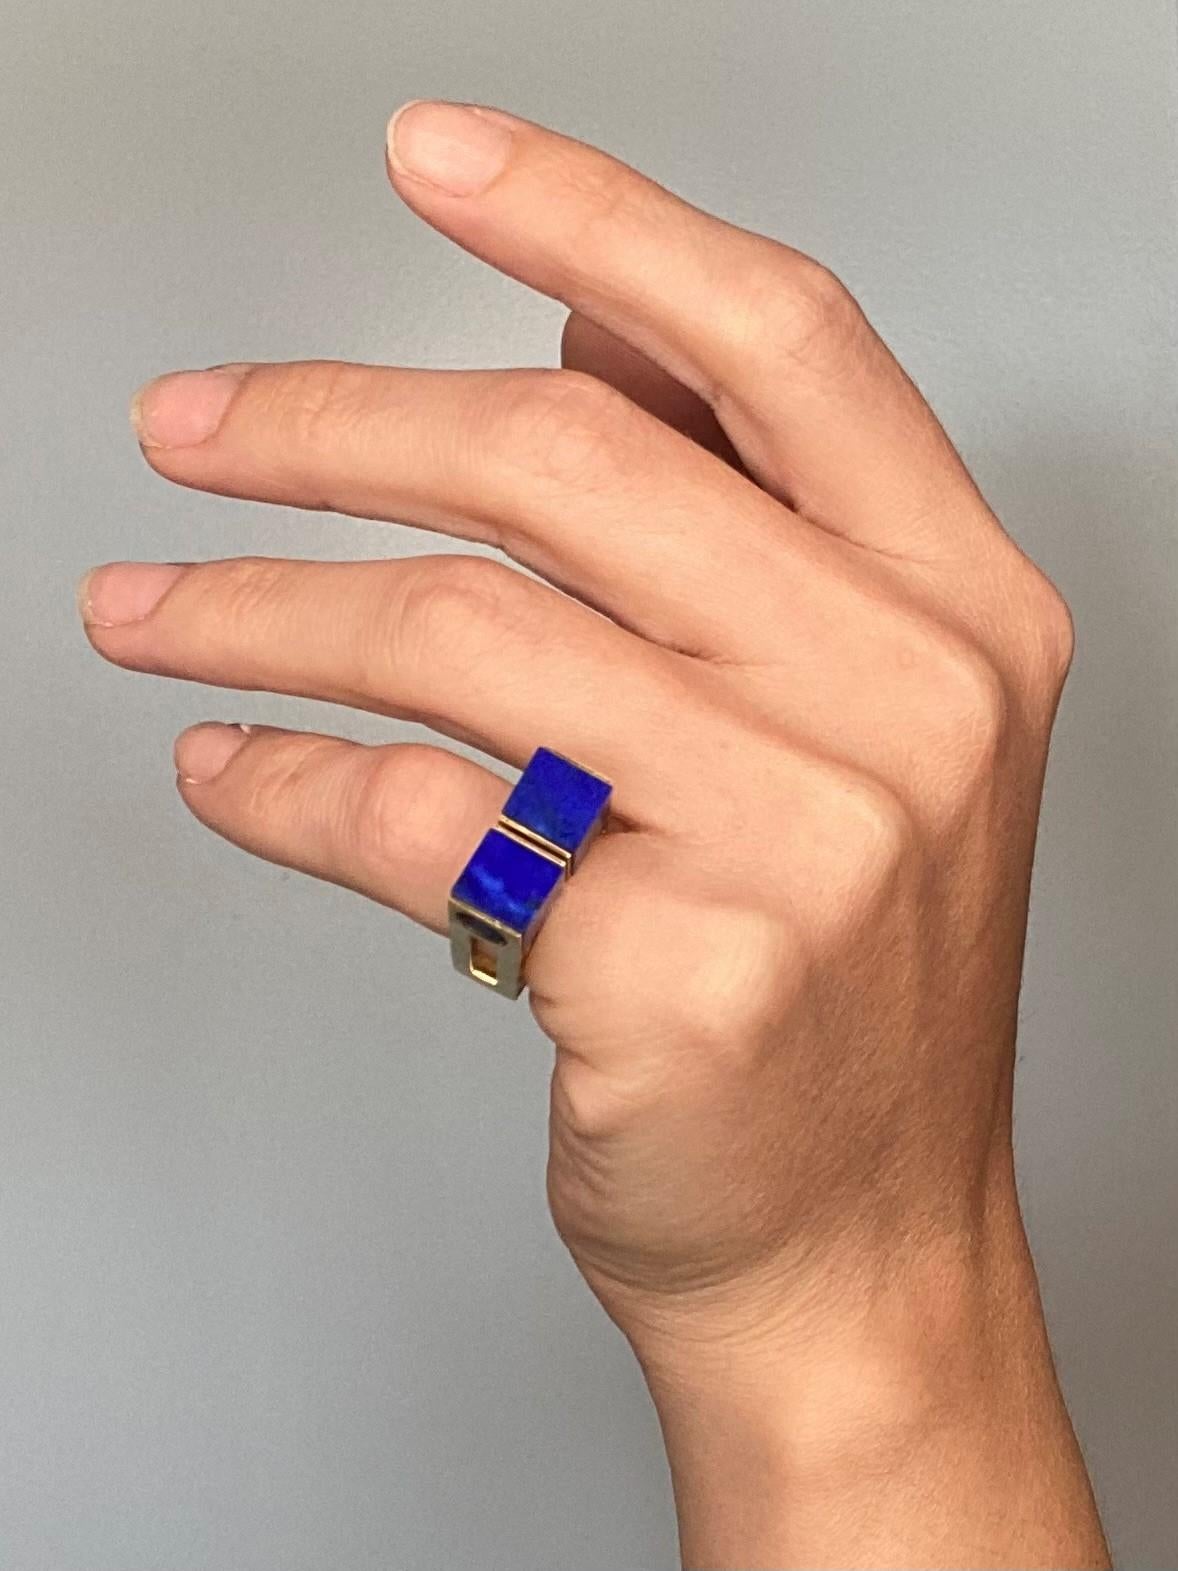 Geometric ring designed by Octavio Sarda Palau.

Fabulous architectural geometric ring, created in Barcelona Spain by the artist goldsmith Octavio Sarda Palau, back in the 1970. This unusual three dimensional ring has been made with the Bauhaus